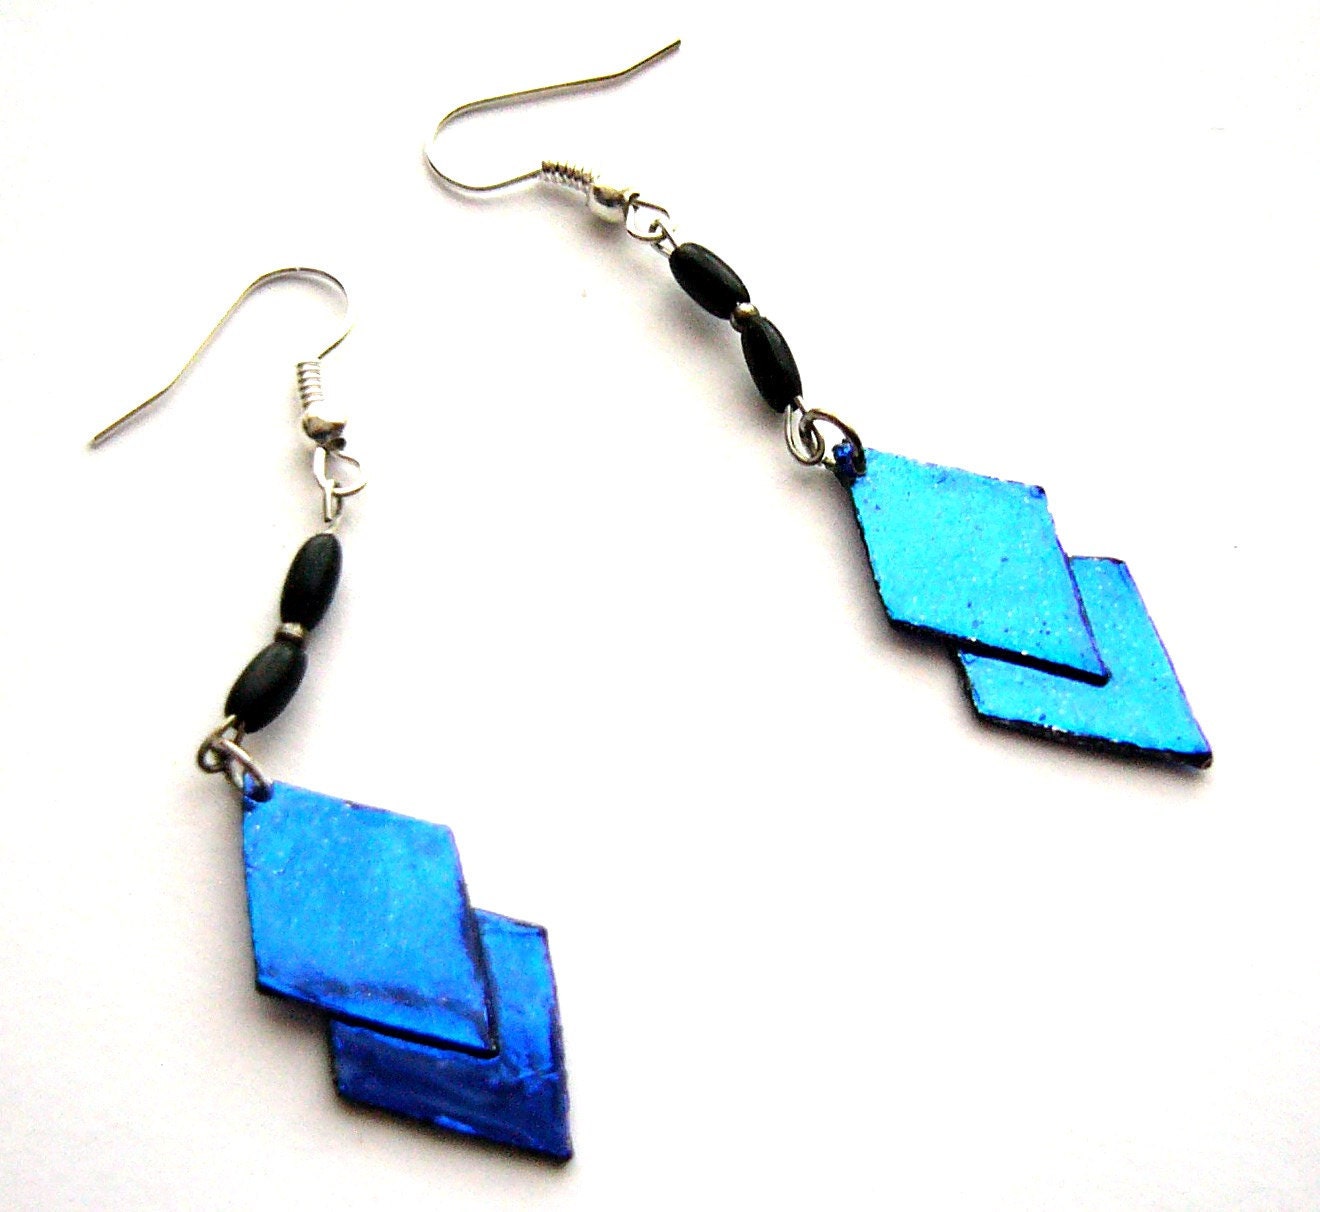 Dark blue shiny paper beads dangle earrings upcycled eco jewelry - with little black beads